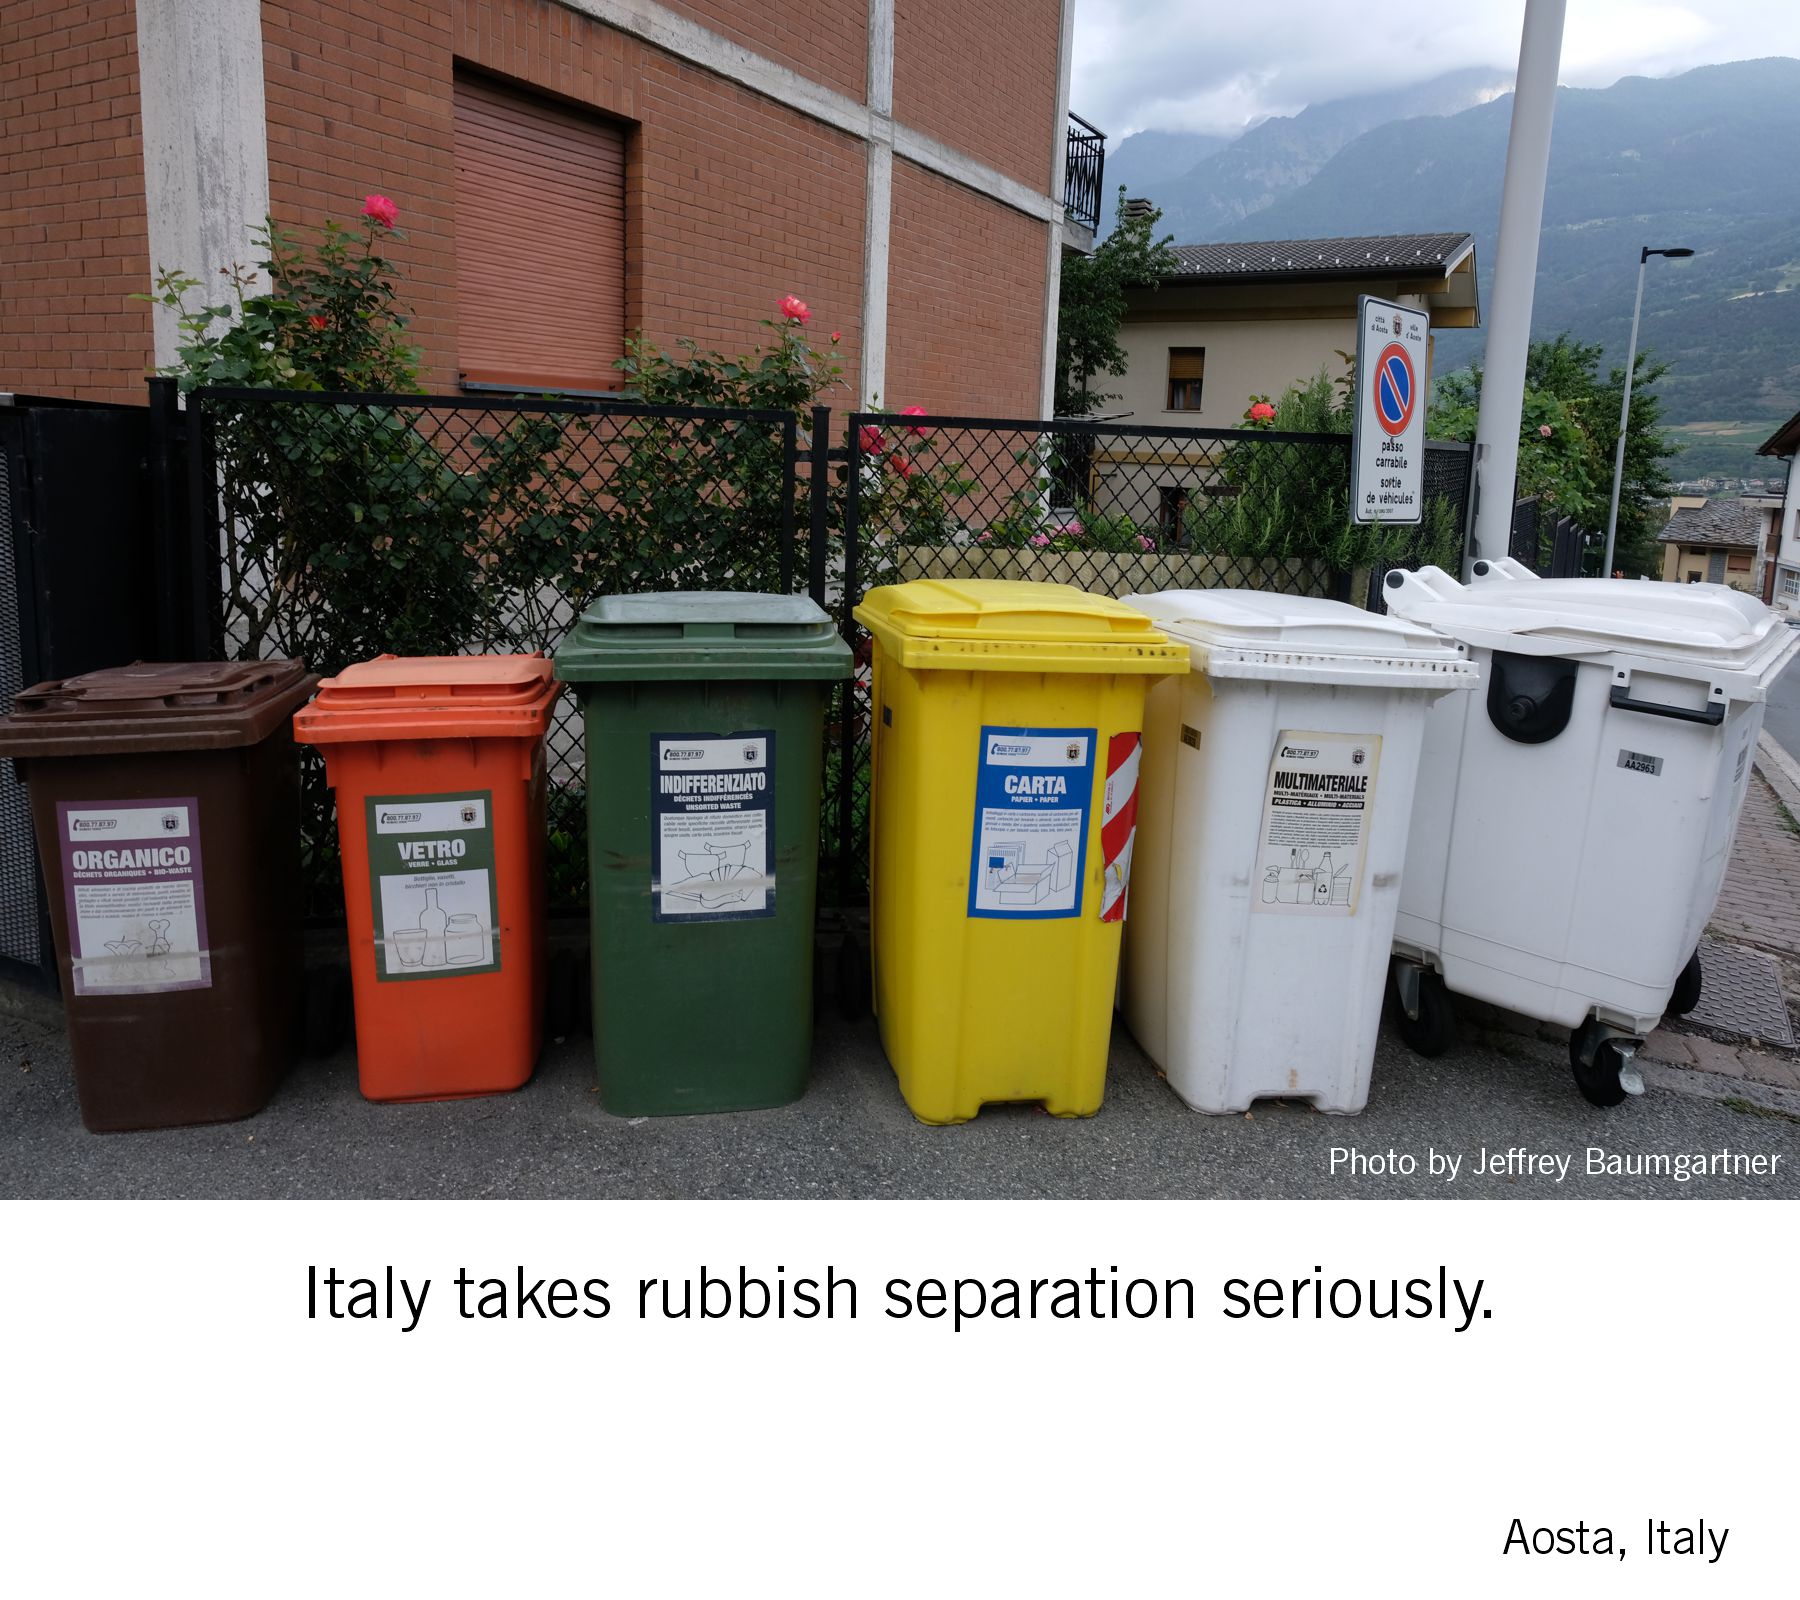 Italy takes separating rubbish seriously.